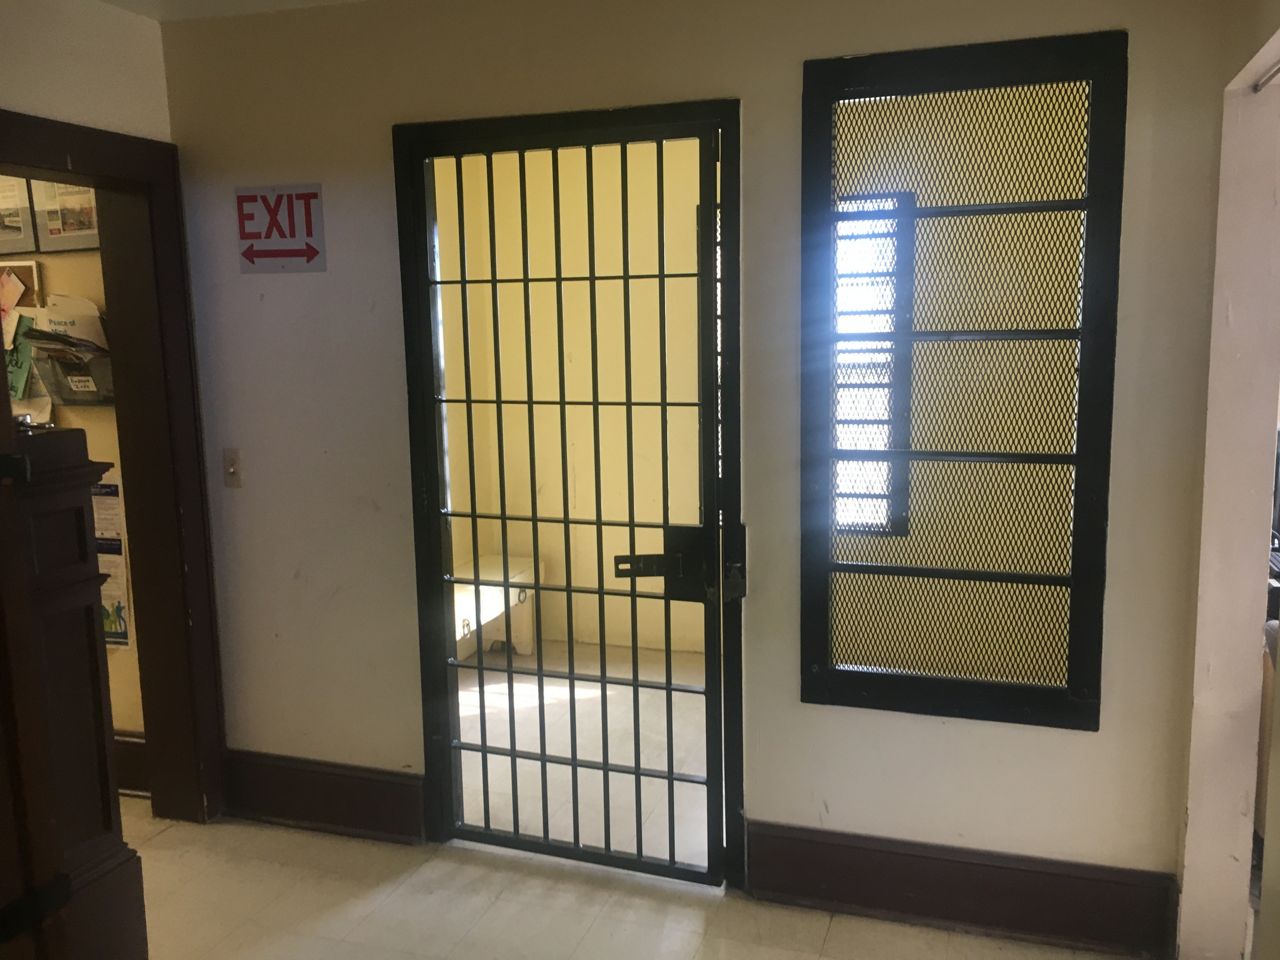 A holding cell inside the Sullivan County Sheriff's Patrol Office